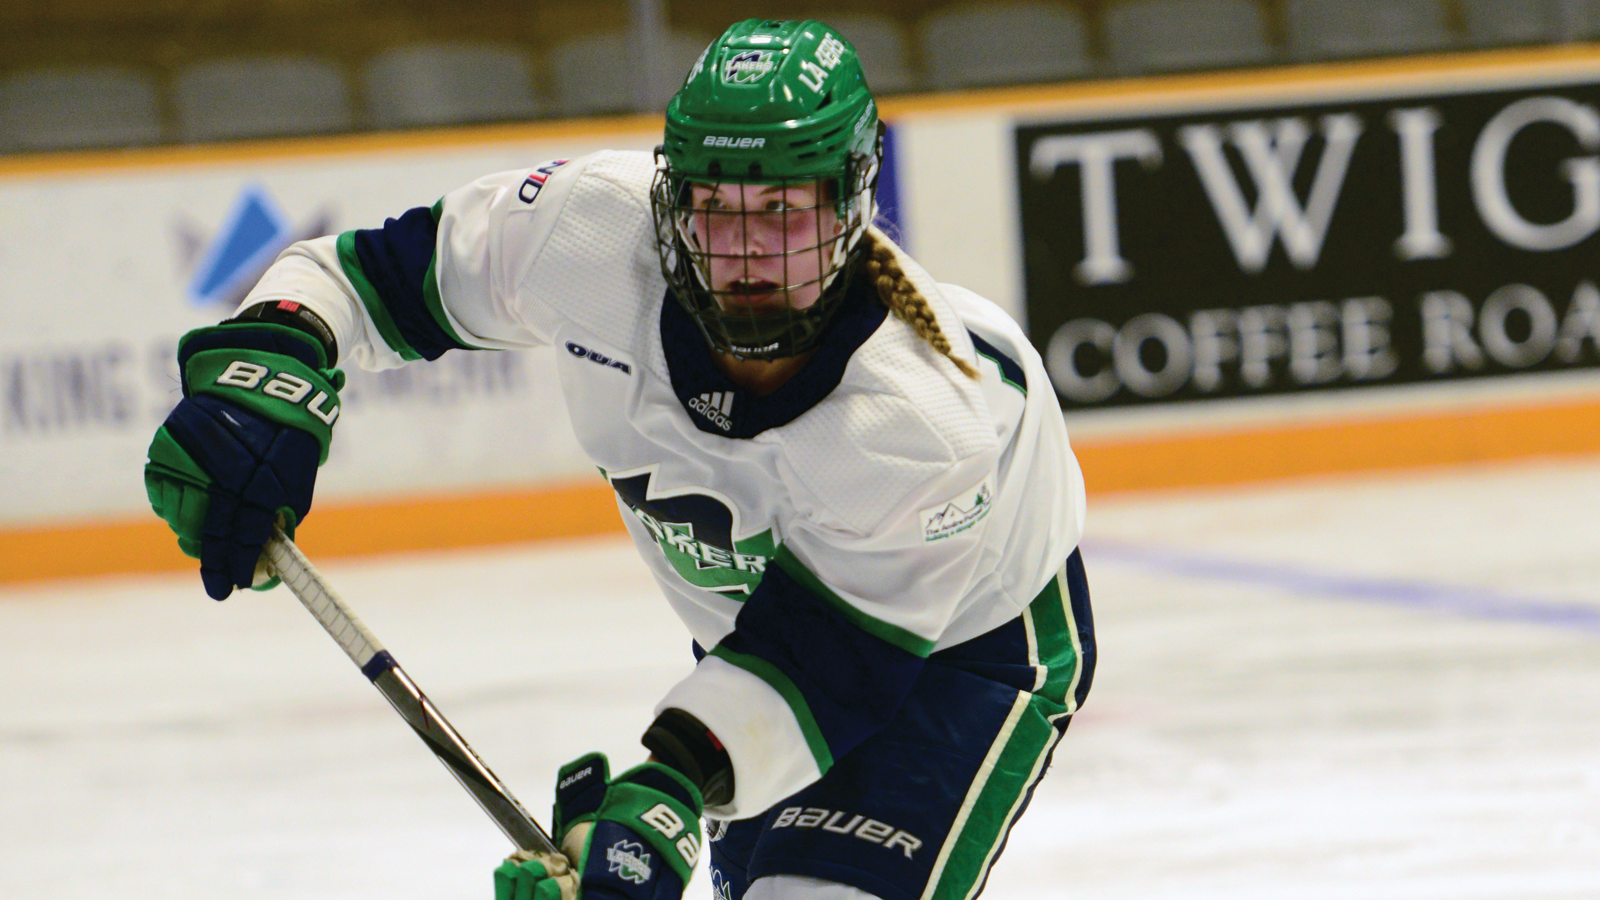 Nipissing women's hockey player Kara Den Hoed skating on the ice during a game while looking downward at the puck on her stick